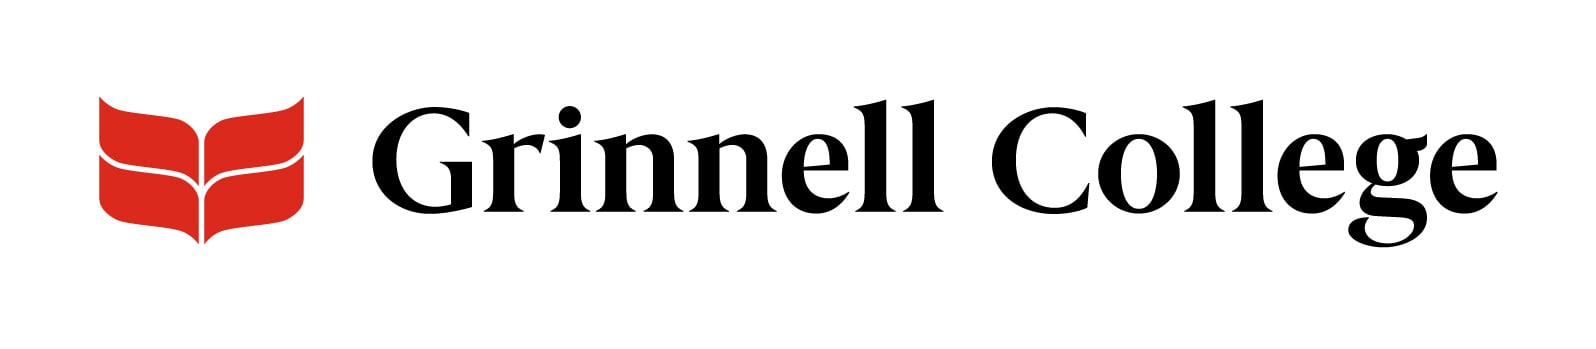 grinnell logo primary 2CB